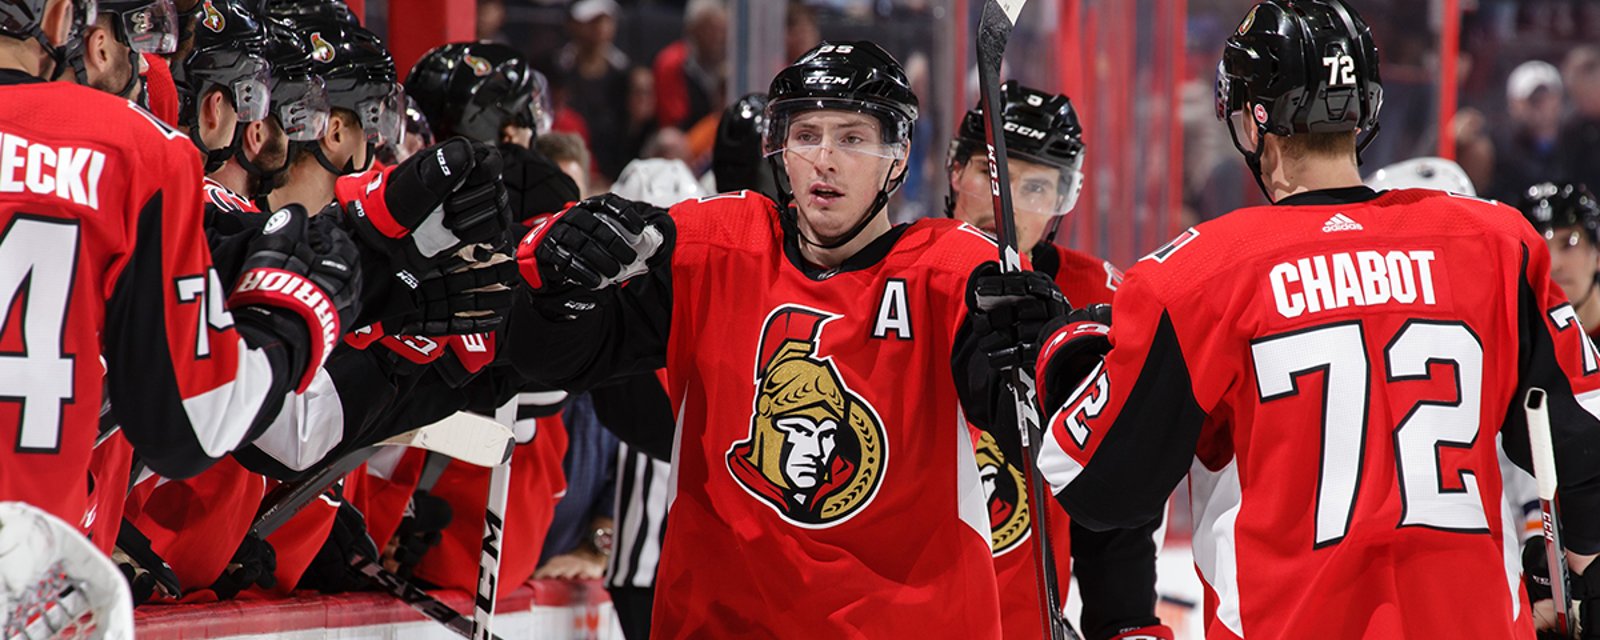 Sens players Duchene, Chabot and others respond to leaked video of them ripping team coaches